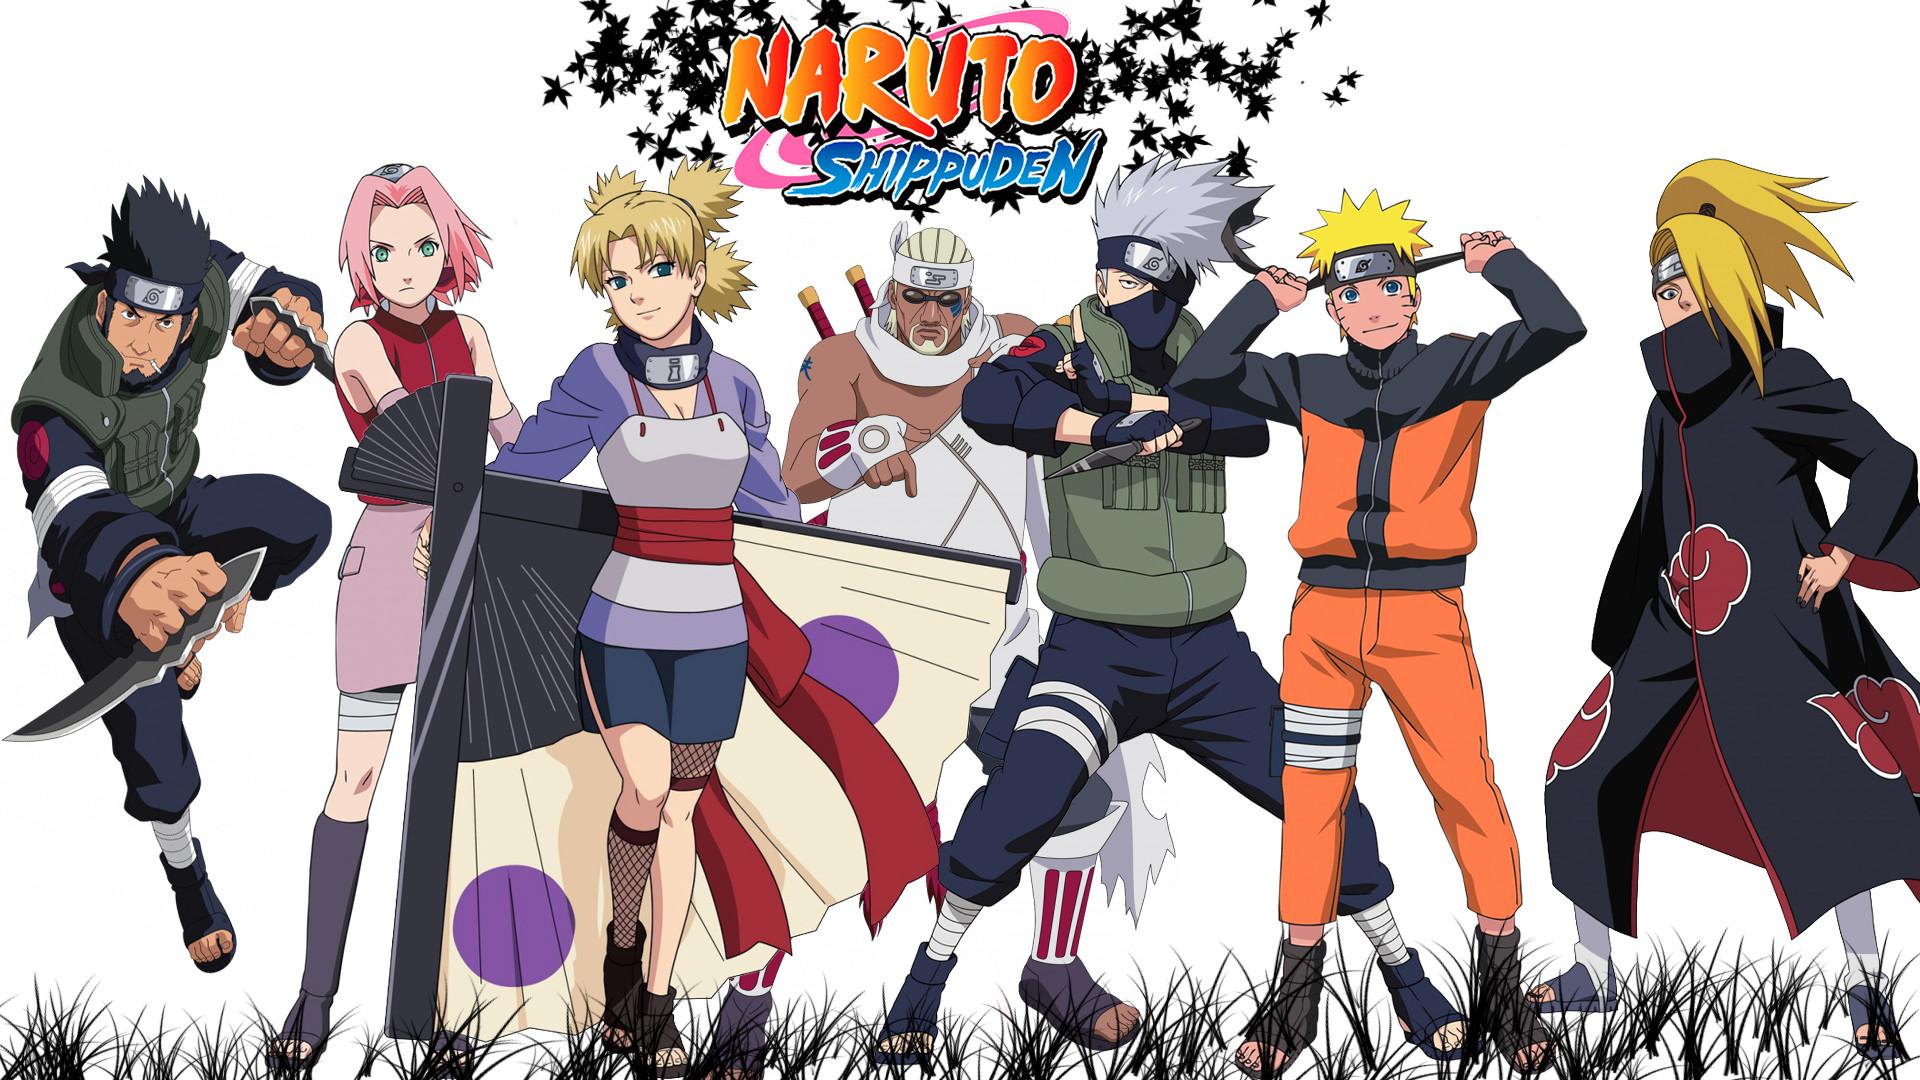 Free Download Naruto Shippuden Awesome Phone Wallpaper